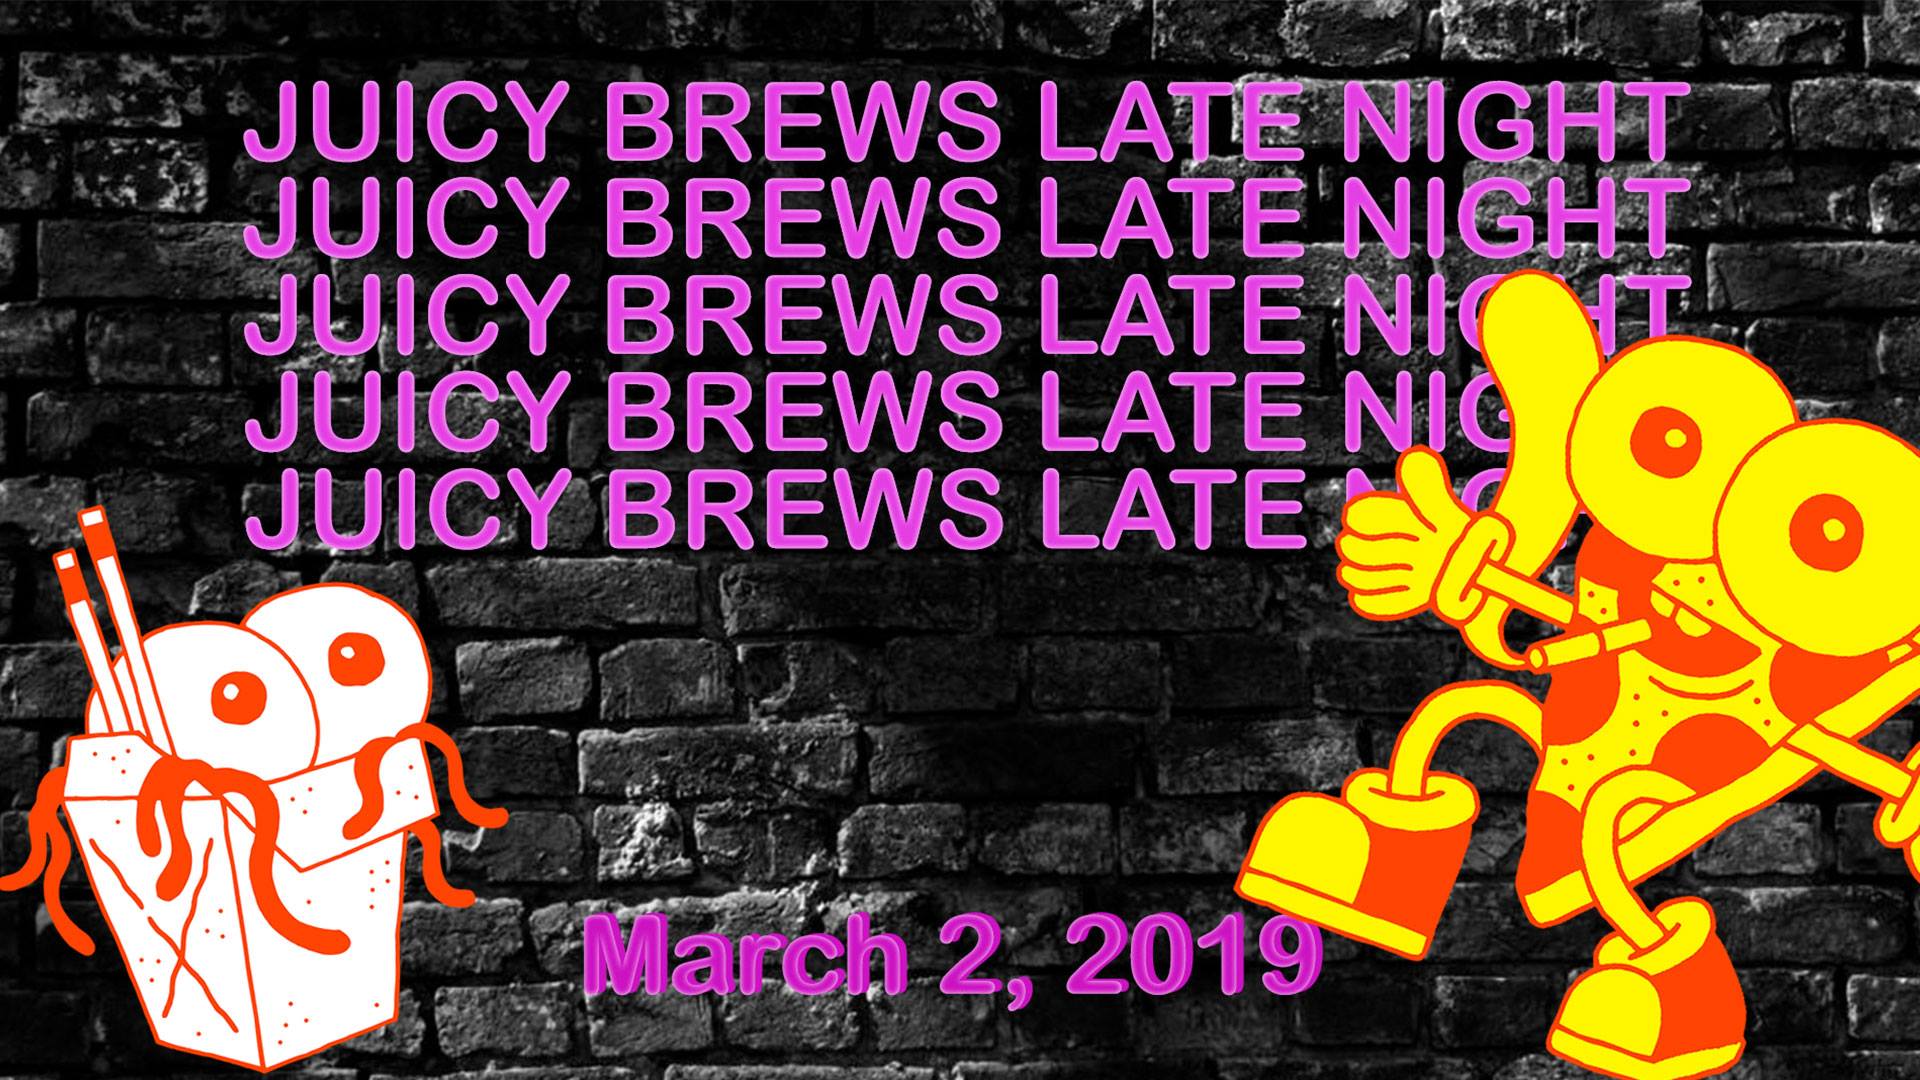 We’re Throwing a Late Night Beer Festival in Pittsburgh, PA